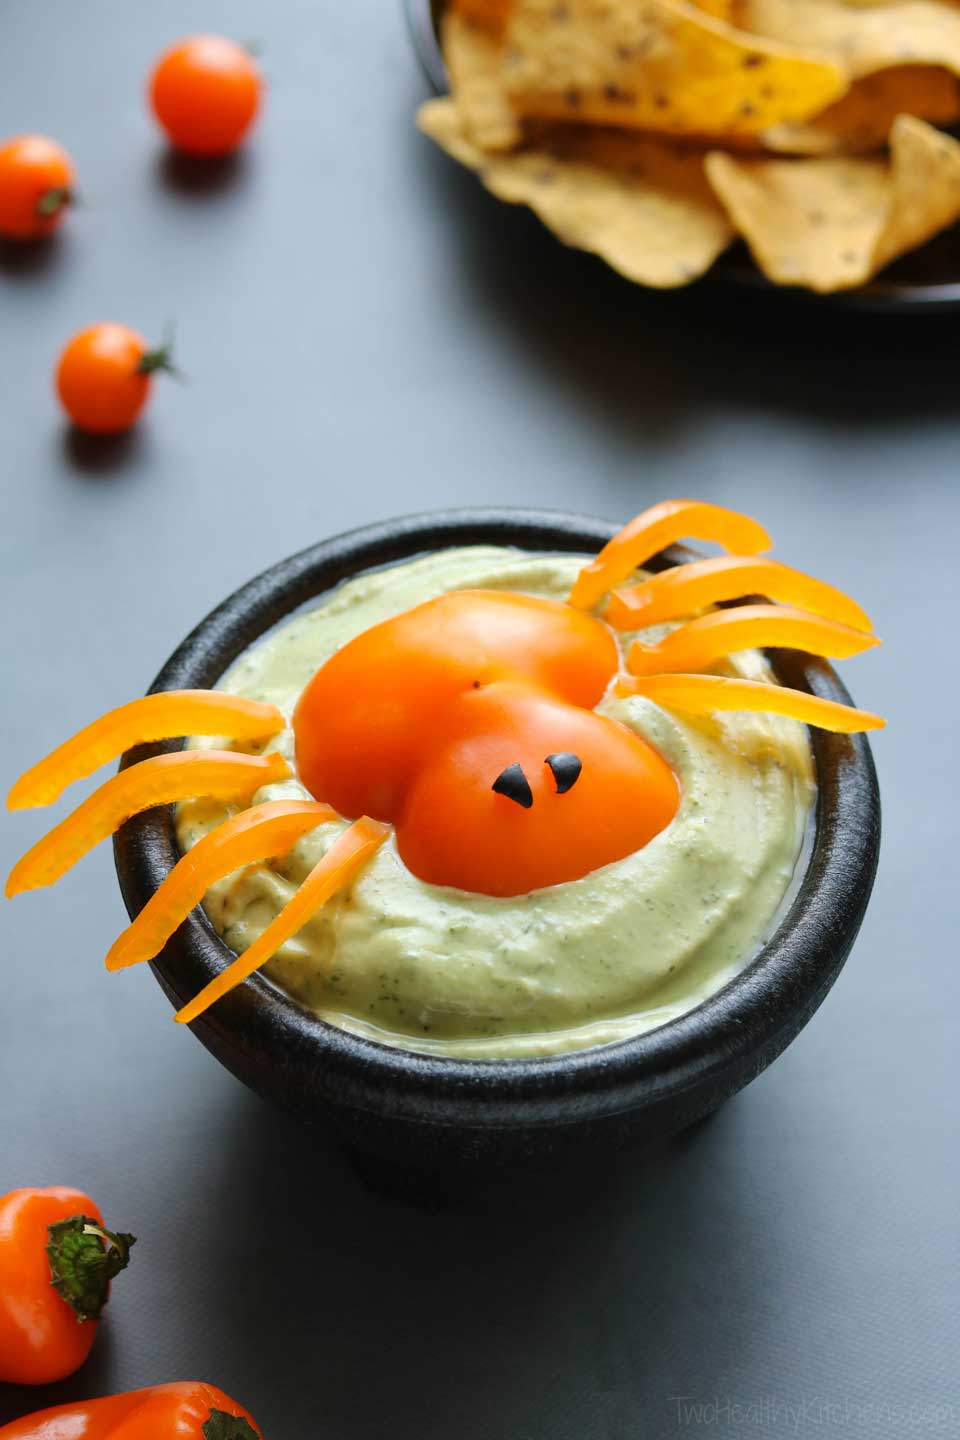 Don’t save this idea only for Halloween parties! It’s so quick to make, that you can easily whip it up as a fun Halloween snack for the kids after school. Perfect way to load them up with some veggies before they head out trick-or-treating!